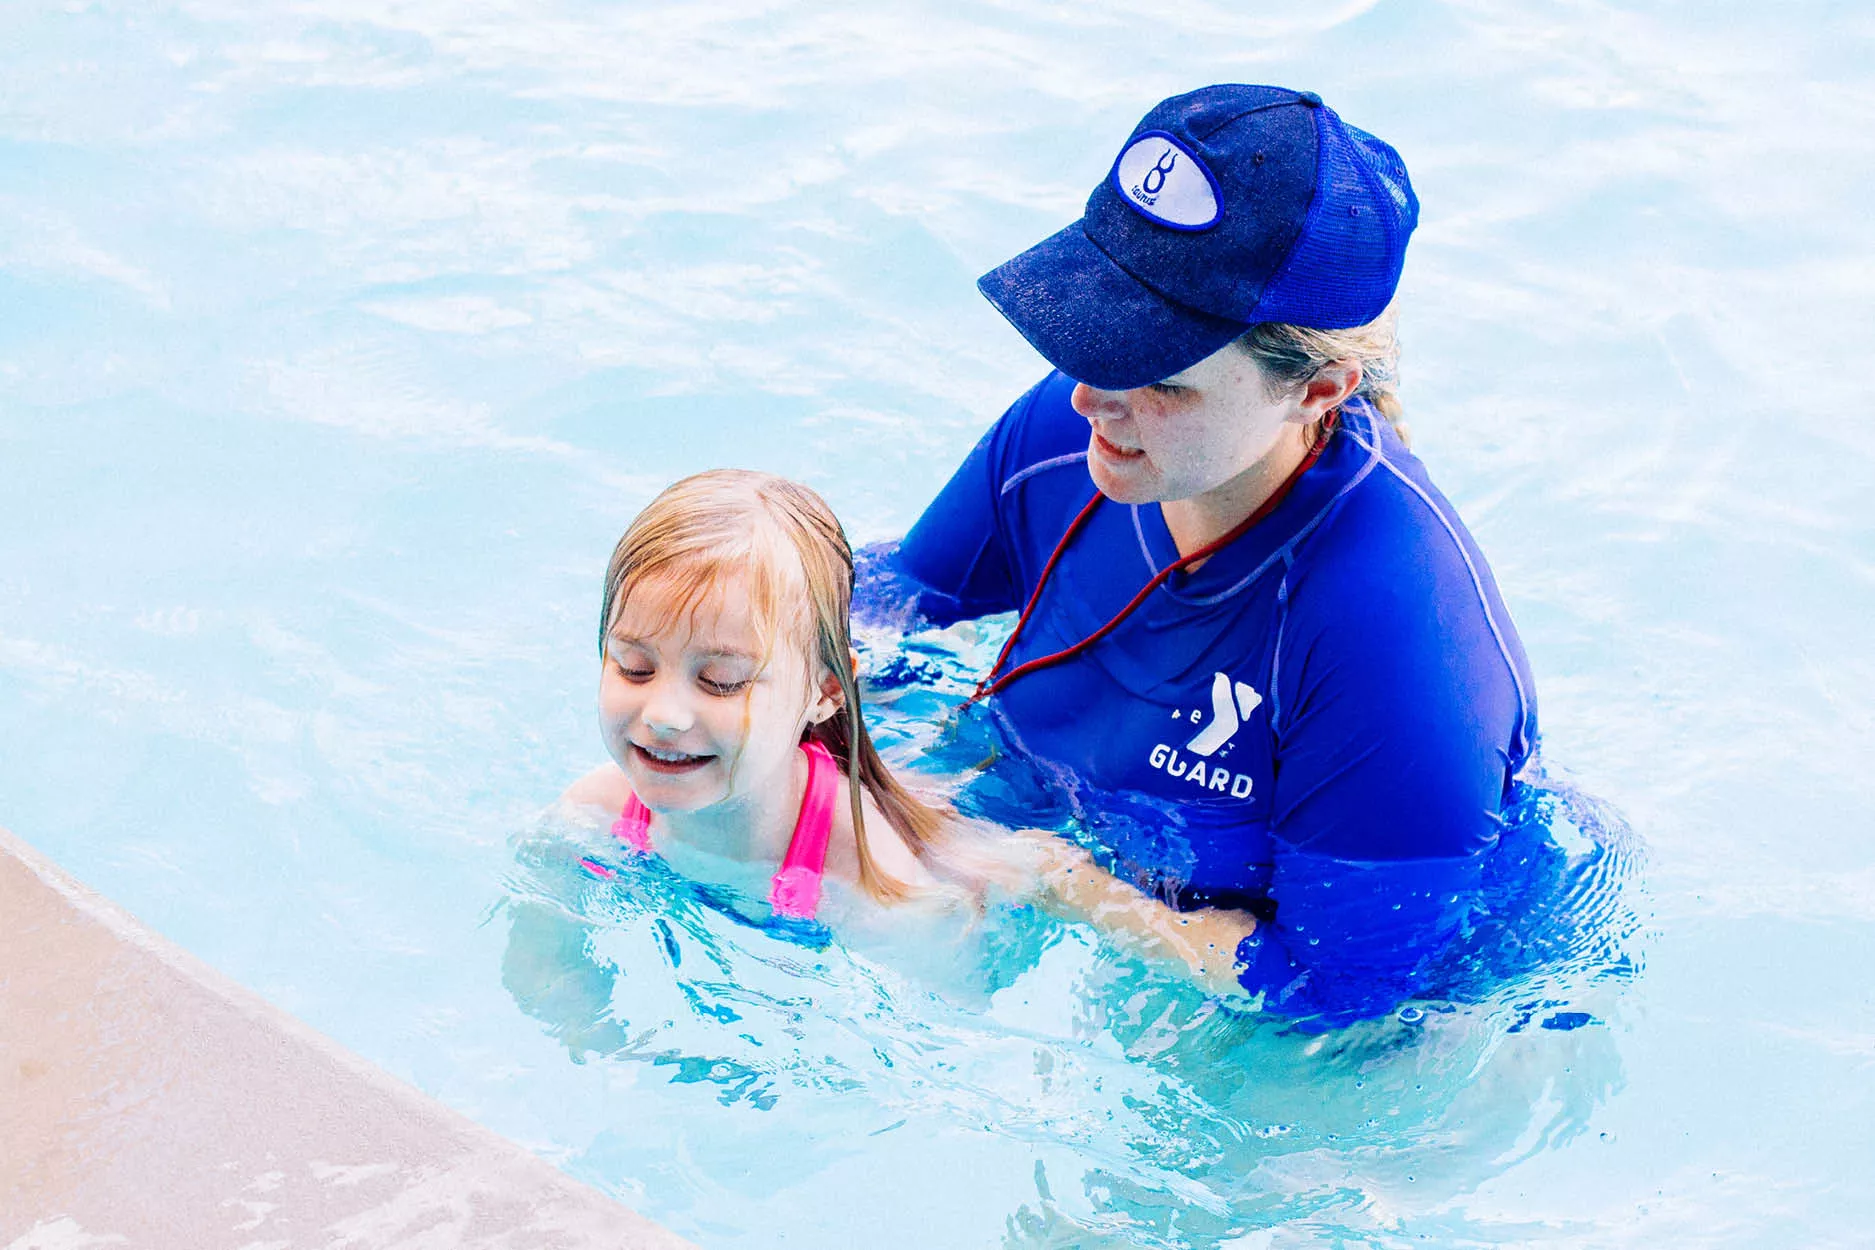 Lifeguard assisting female child during a swim lesson